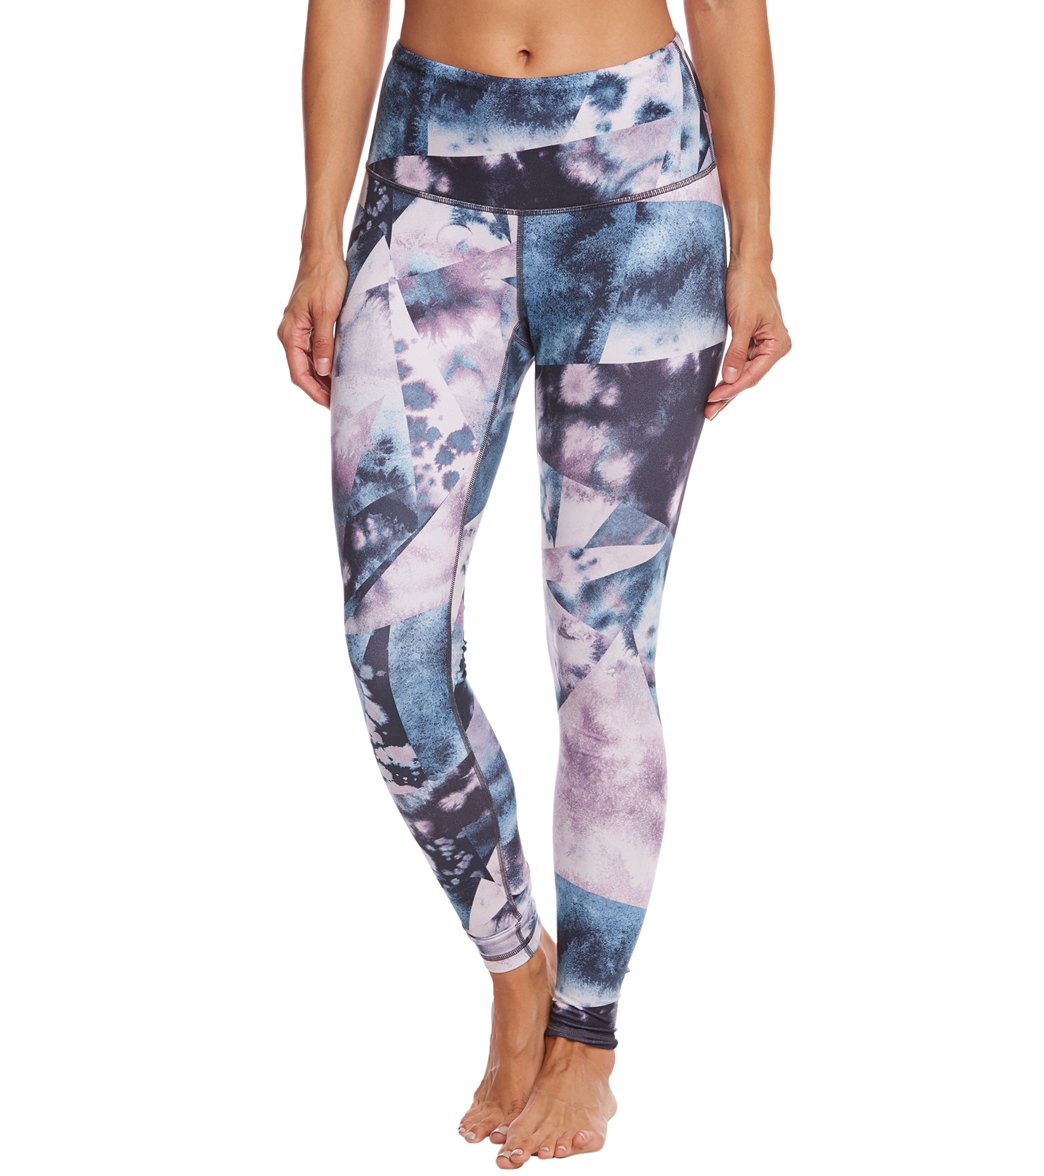 Lucy Women's Printed Studio High Rise Hatha Legging at SwimOutlet.com